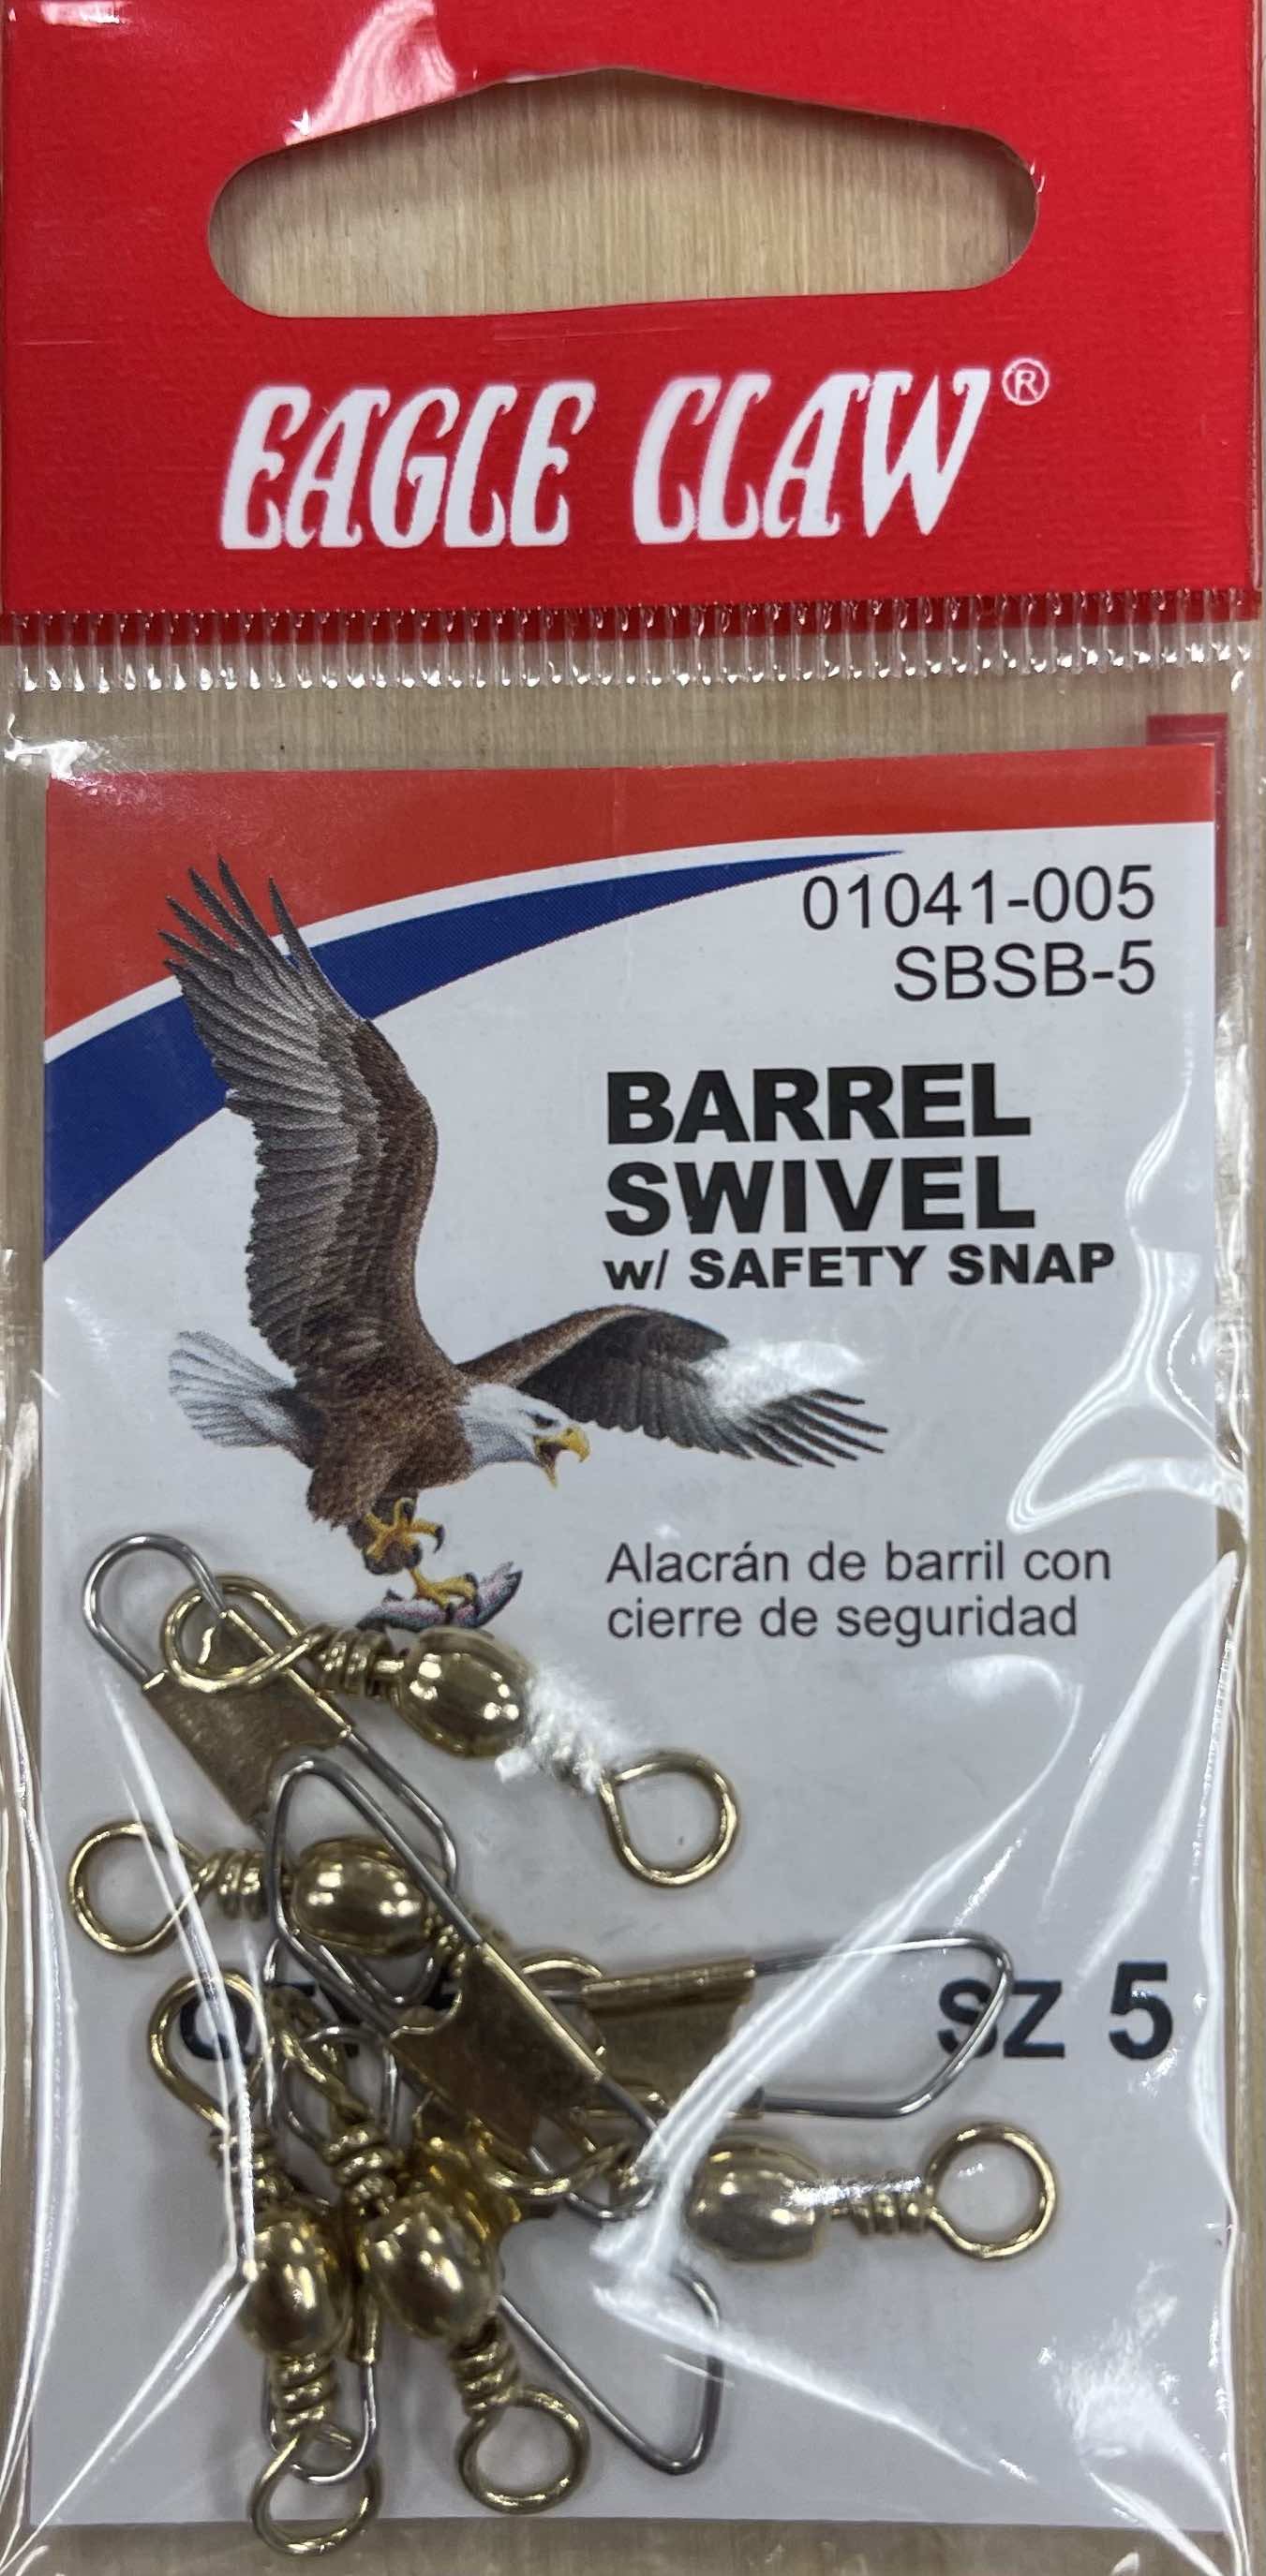 Eagle Claw - Brass Barrel Swivels with Safety Snaps